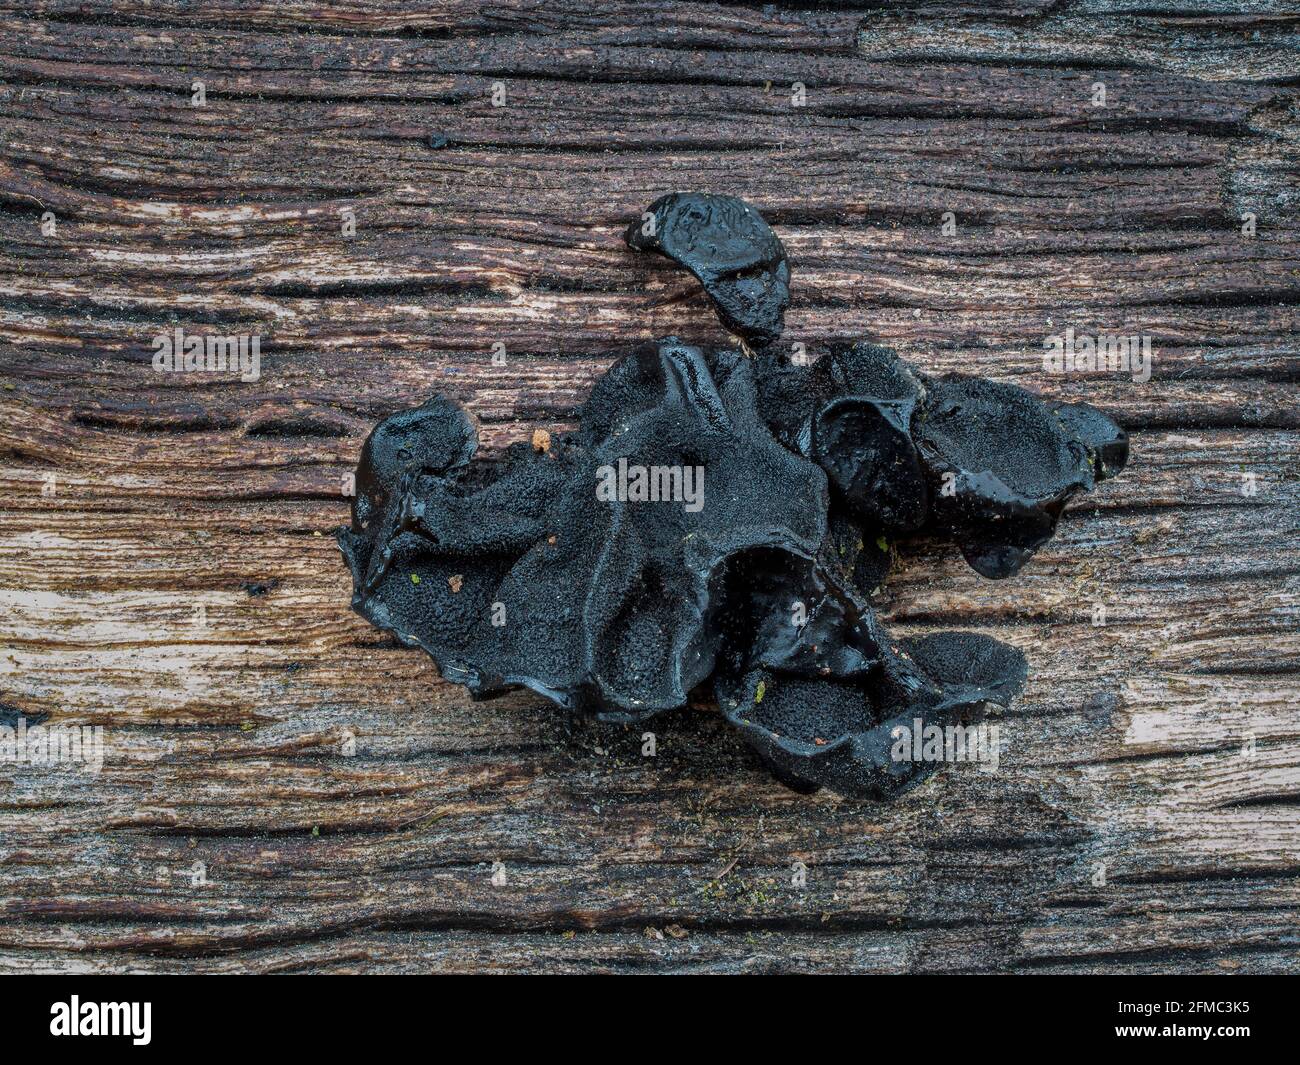 Exidia glandulosa (common names black witches butter, black jelly roll, or warty jelly fungus) is a jelly fungus in the family Auriculariaceae. , an i Stock Photo